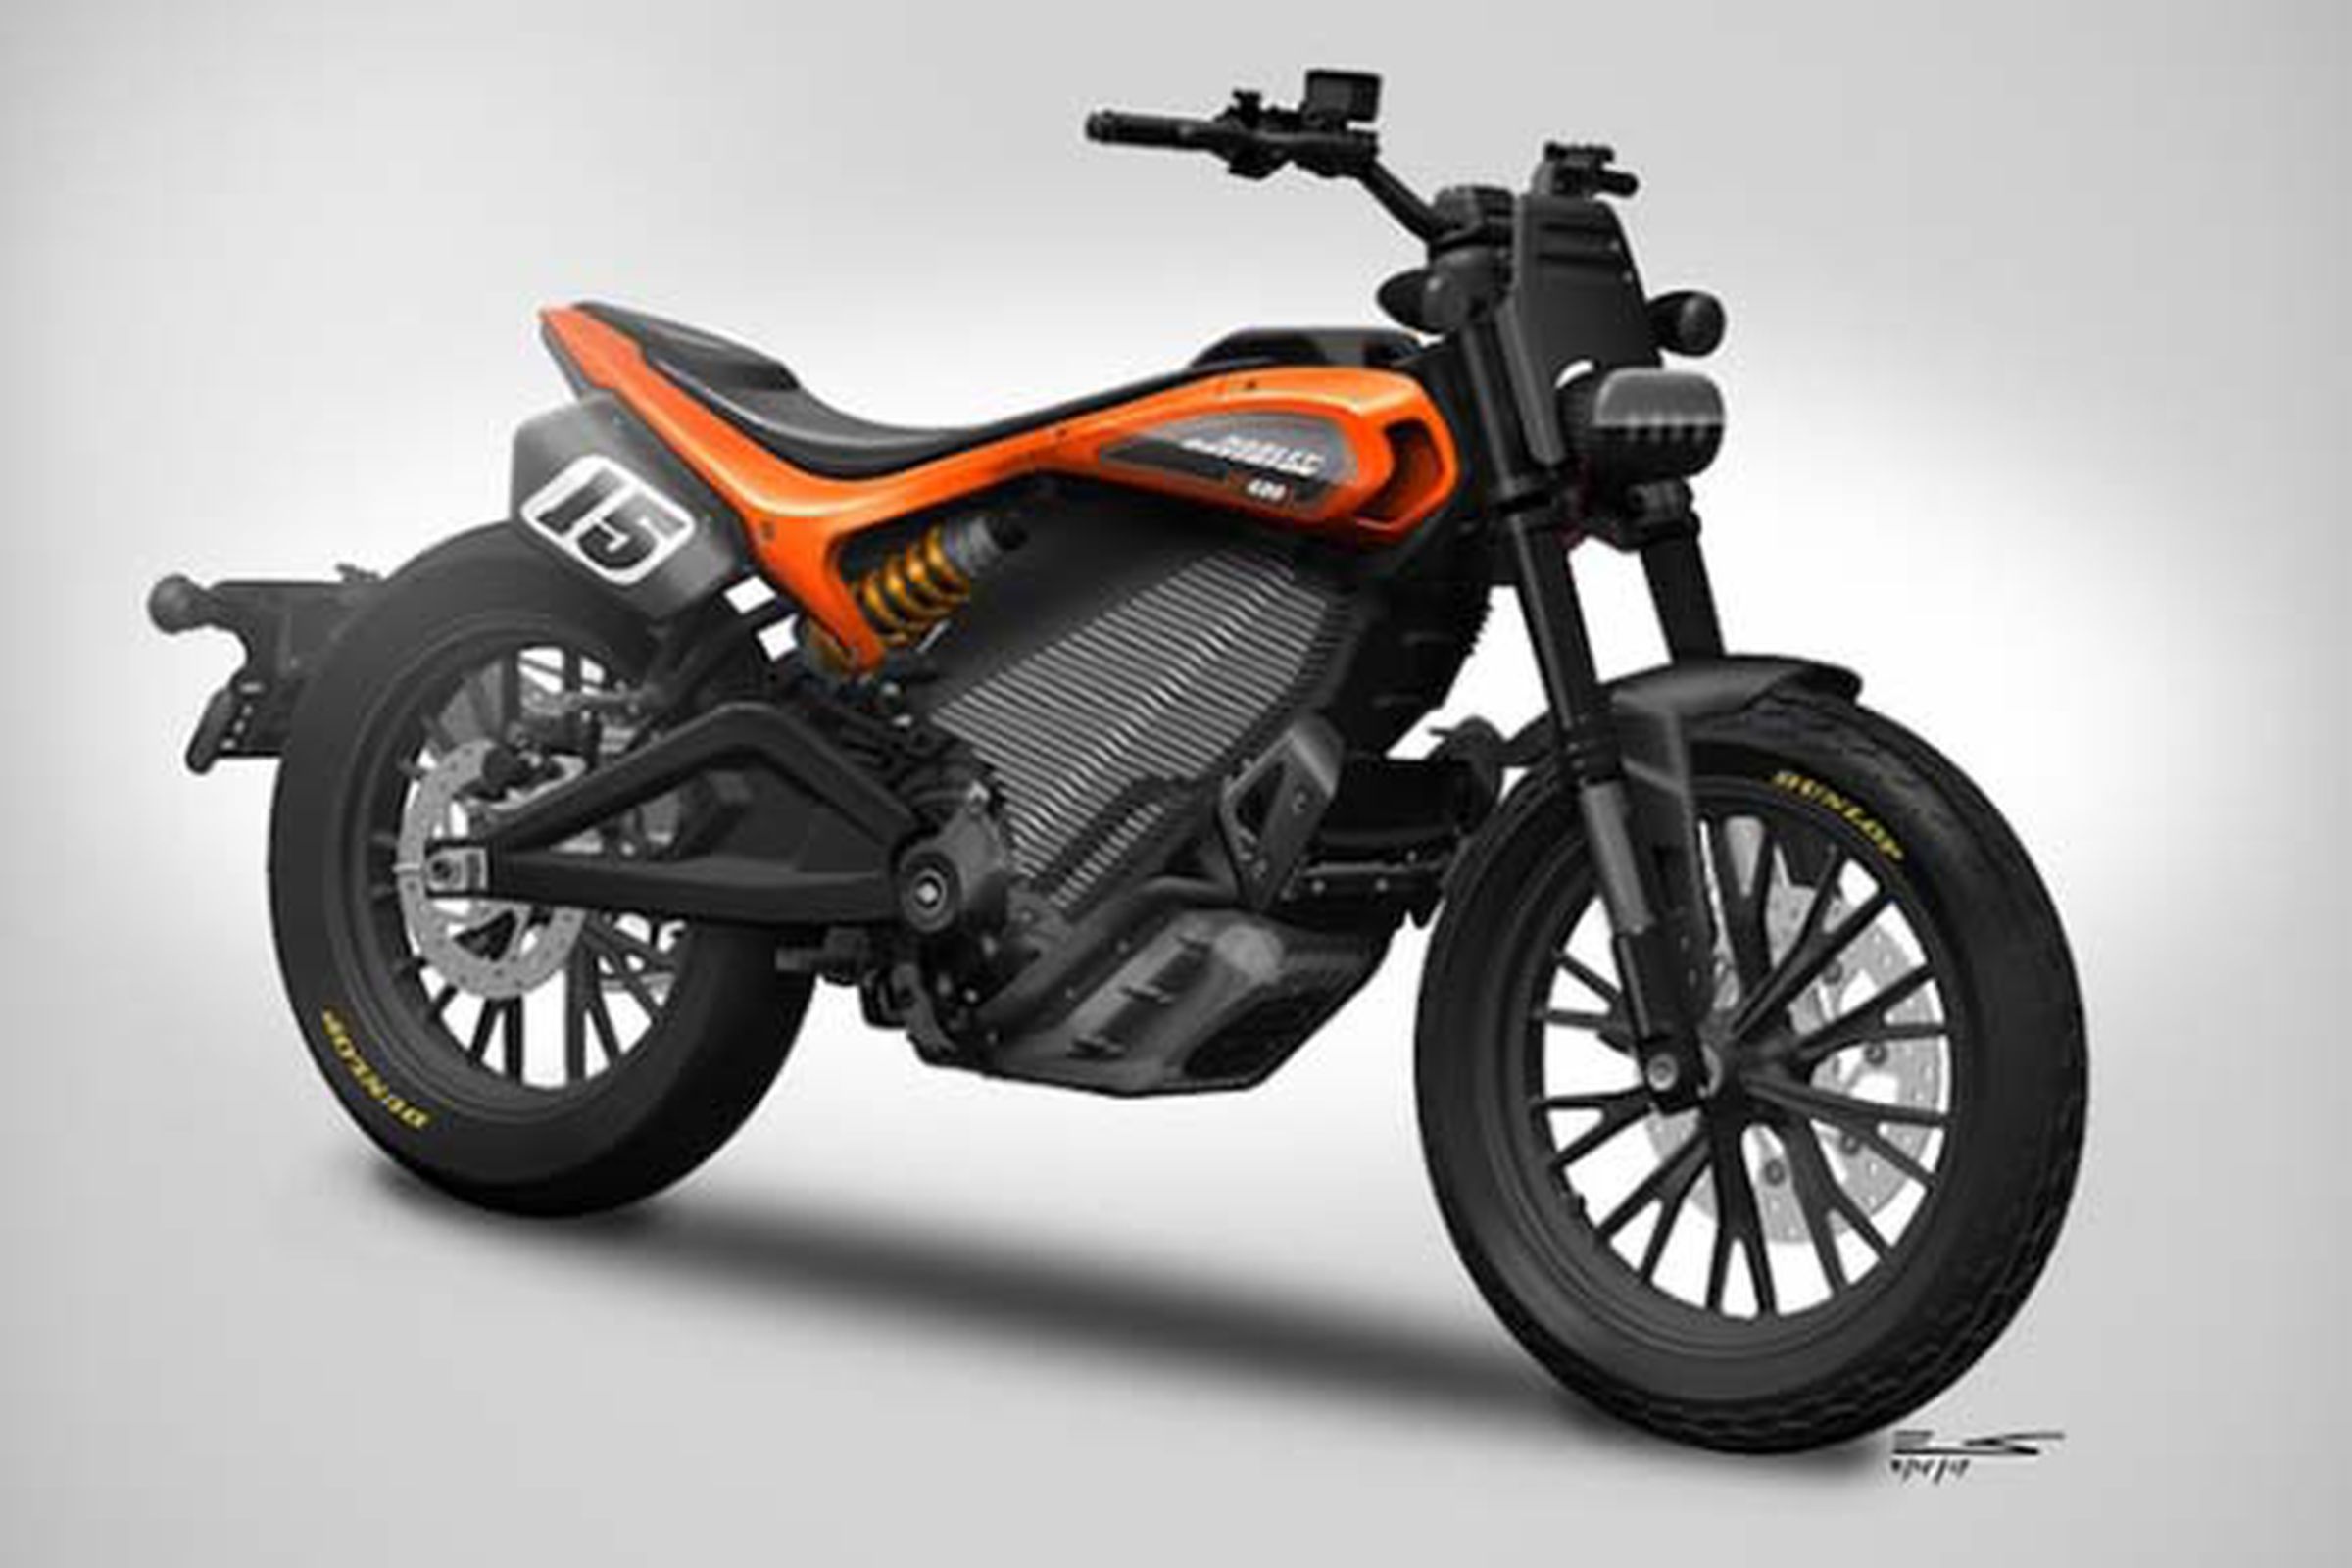 A Harley-Davidson concept image from 2019 showing a potential future middleweight model.